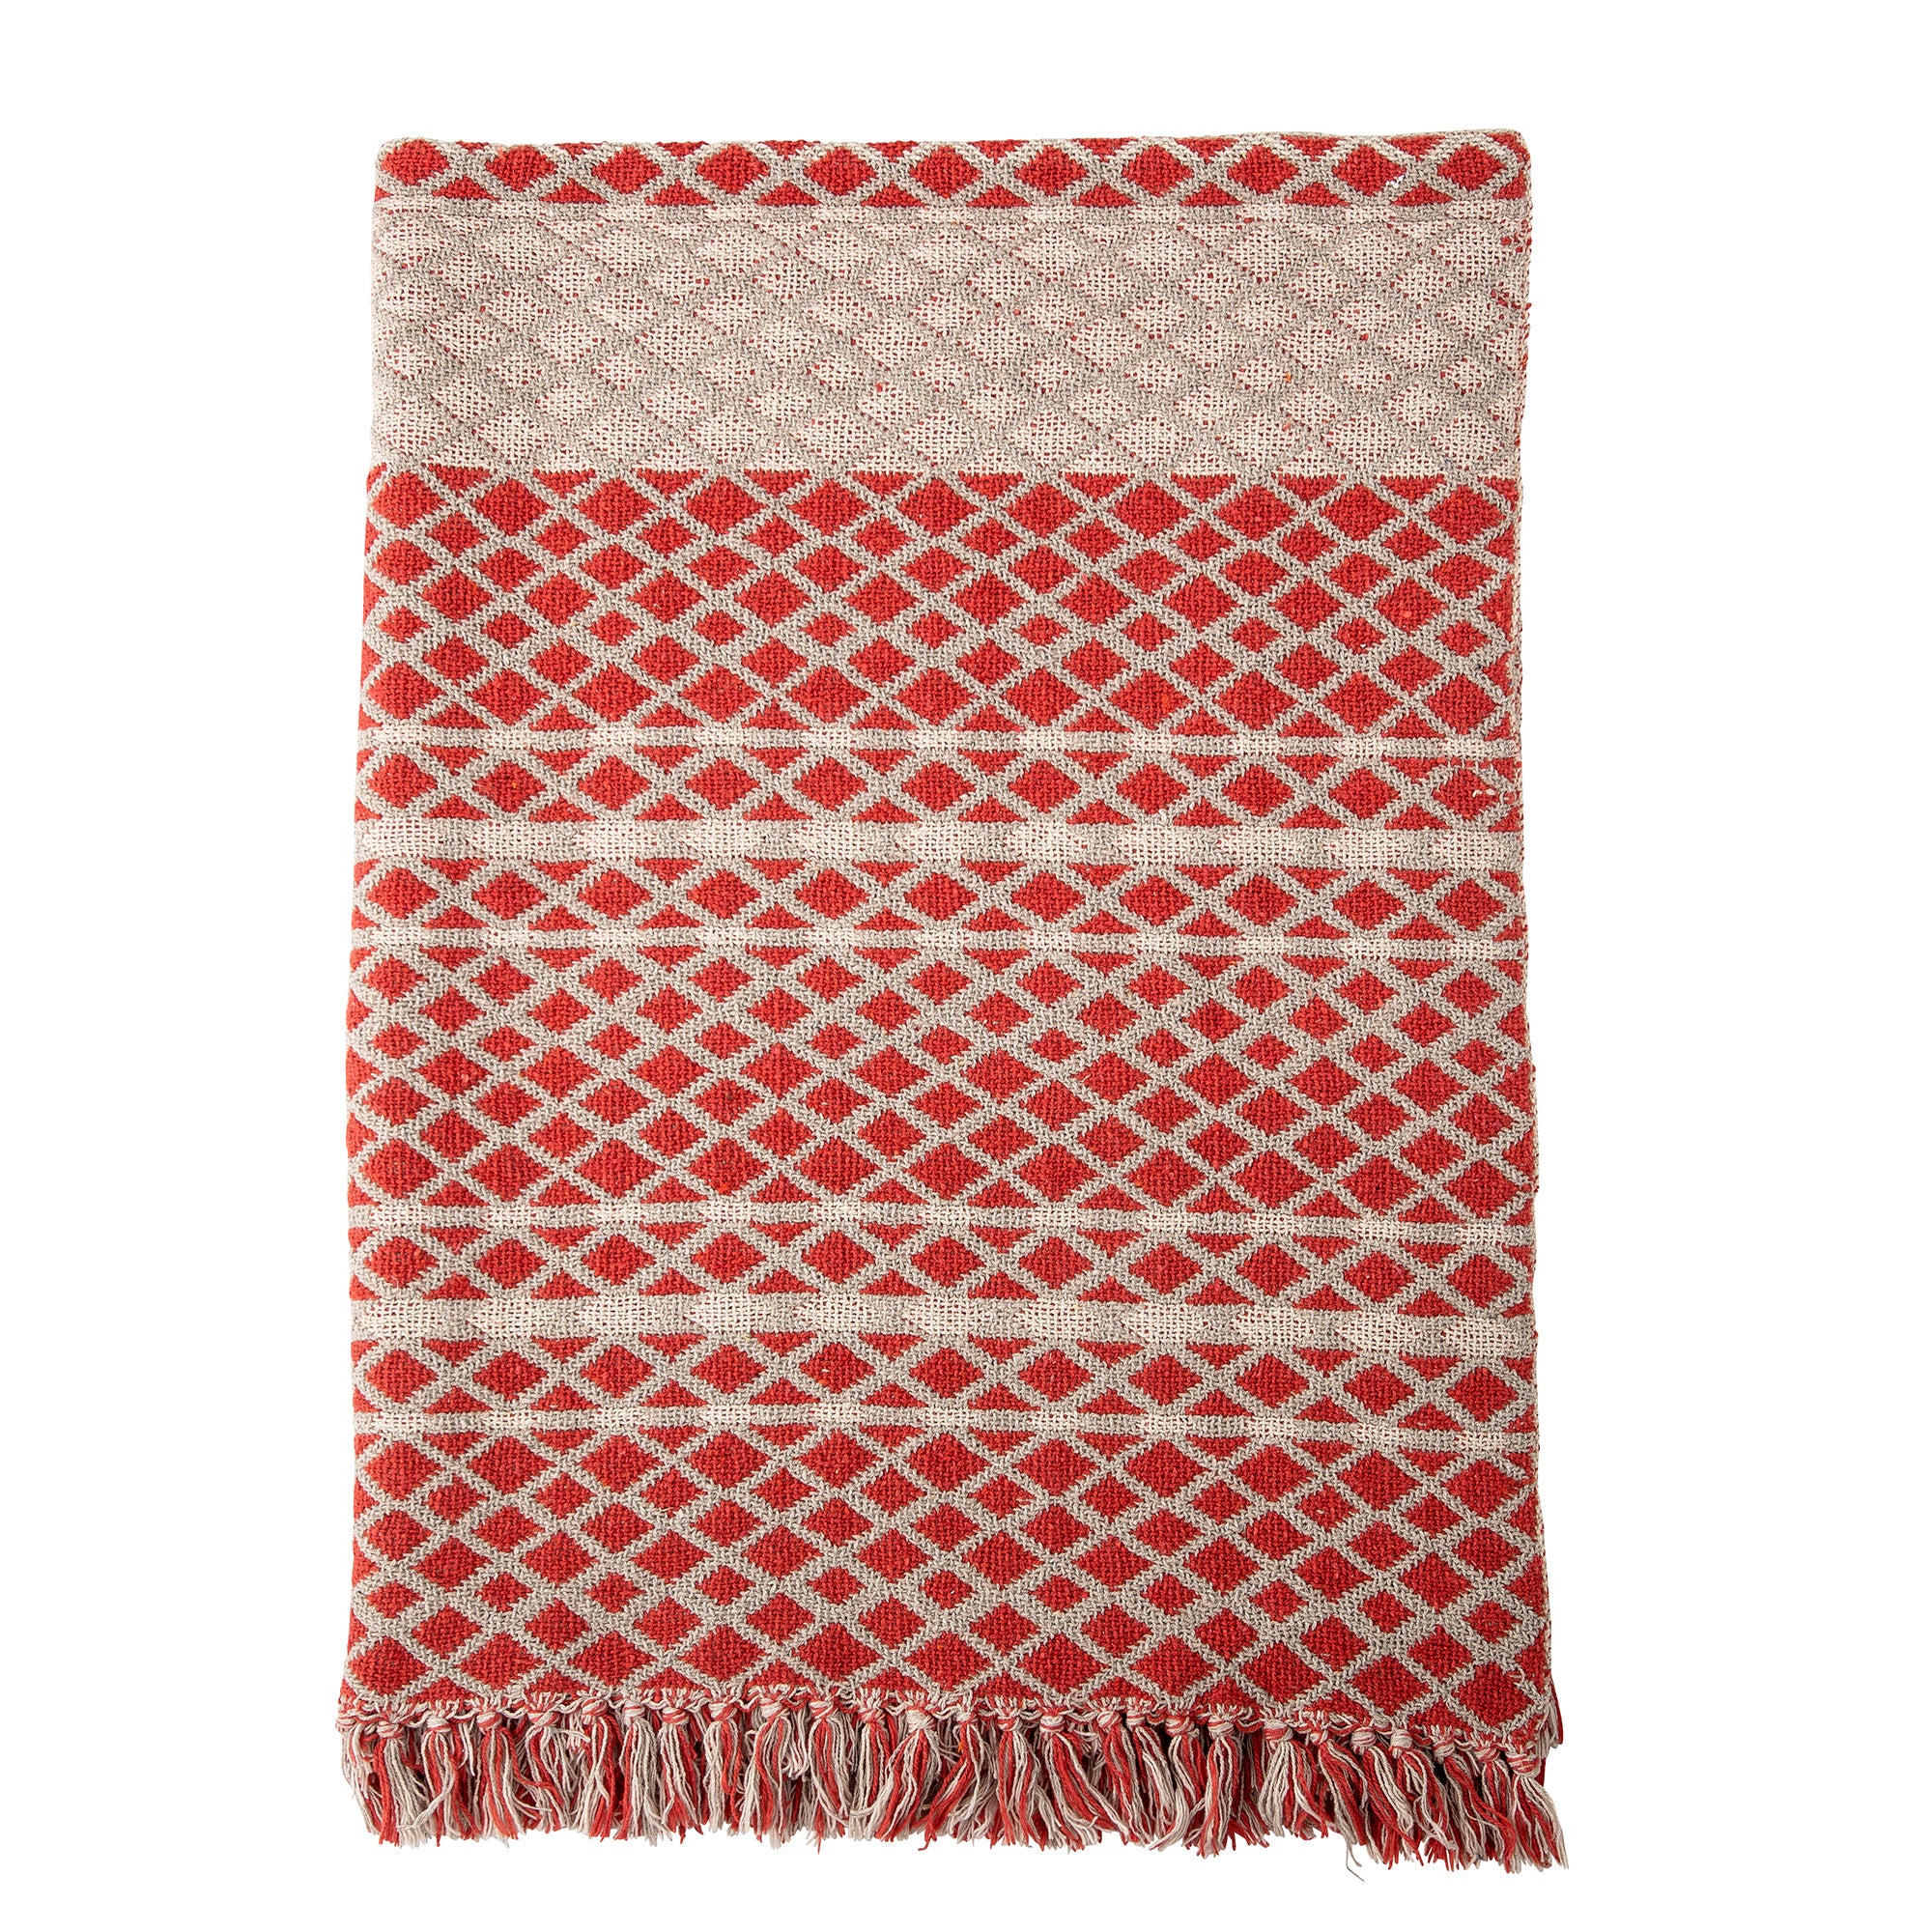 Verona Throw, Red, Recycled Cotton